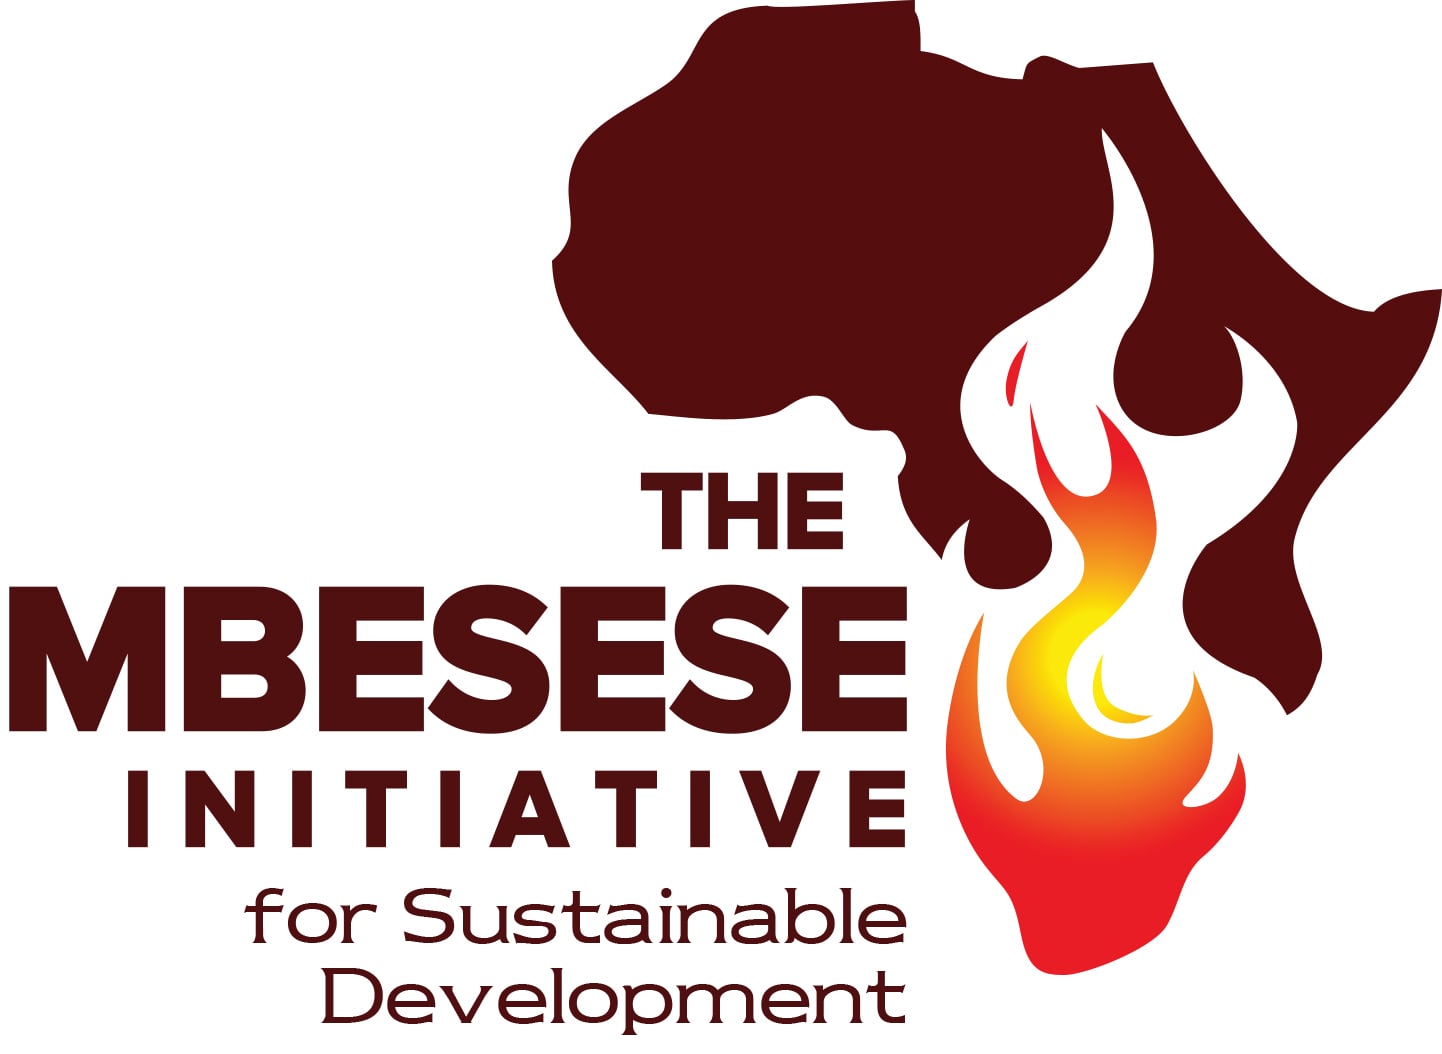 The Mbesese Initiative for Sustainable Development